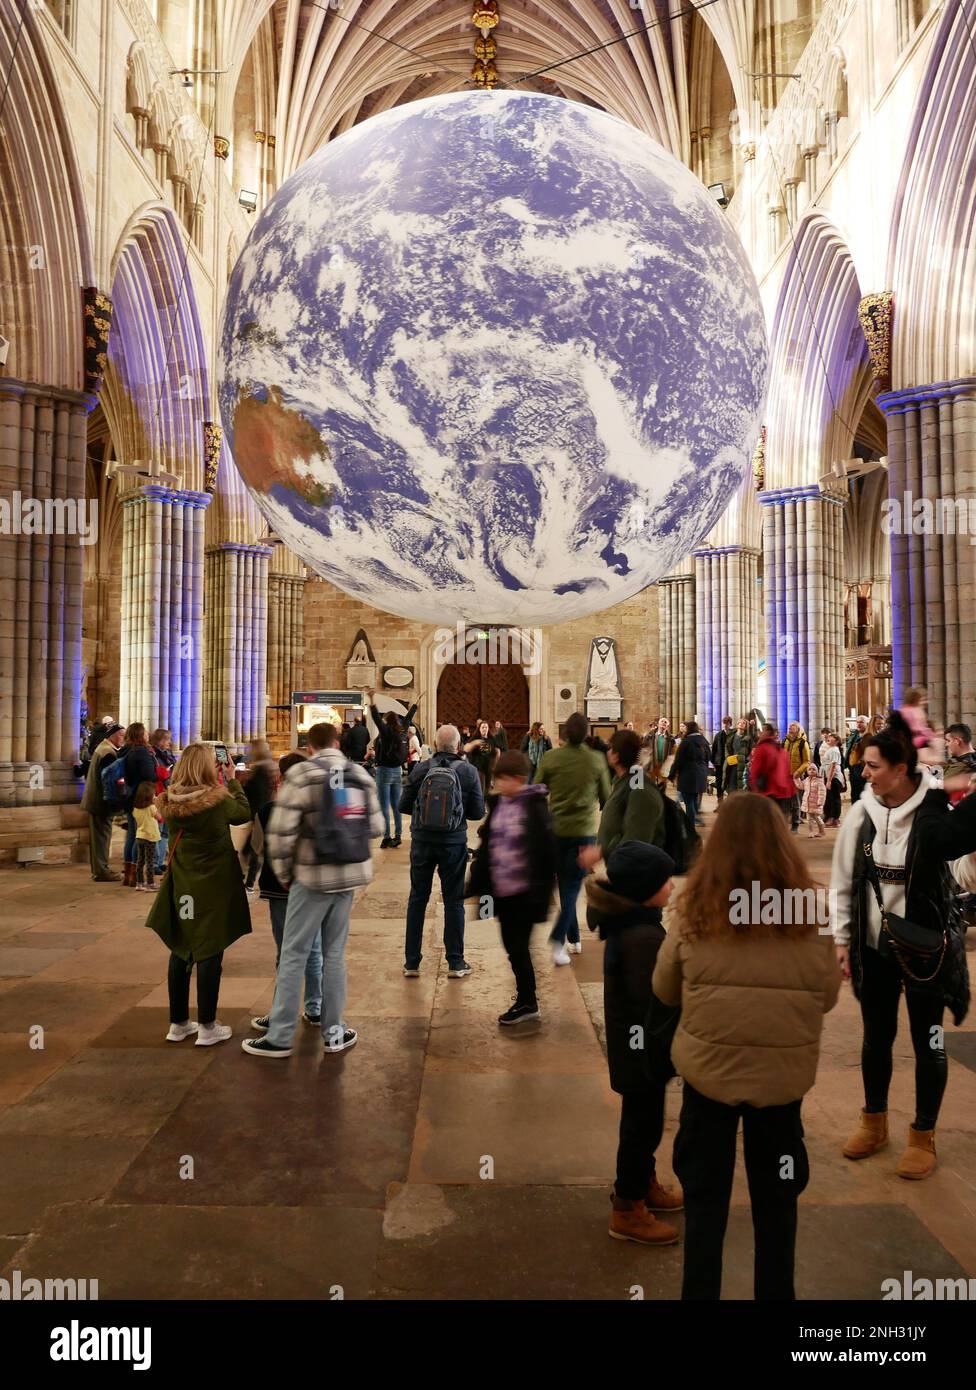 Gaia, a touring artwork by artist Luke Jerram, presented in Exeter Cathedral, Exeter, Devon UK Stock Photo